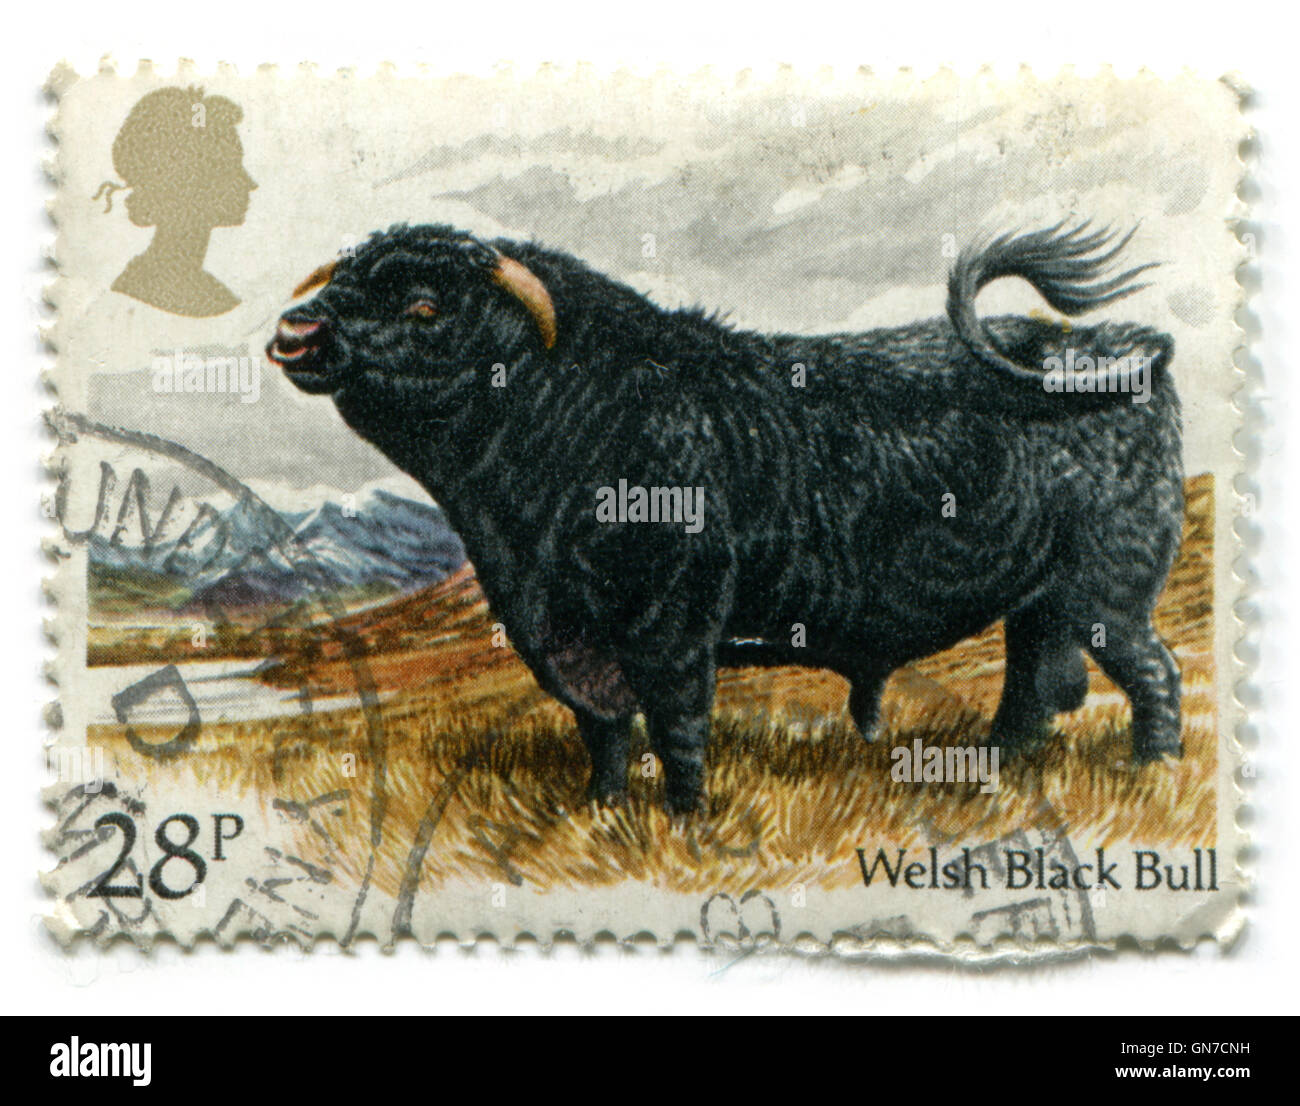 UNITED KINGDOM - CIRCA 1984: A British Used Postage Stamp showing a Welsh Black Bull, circa 1984 Stock Photo